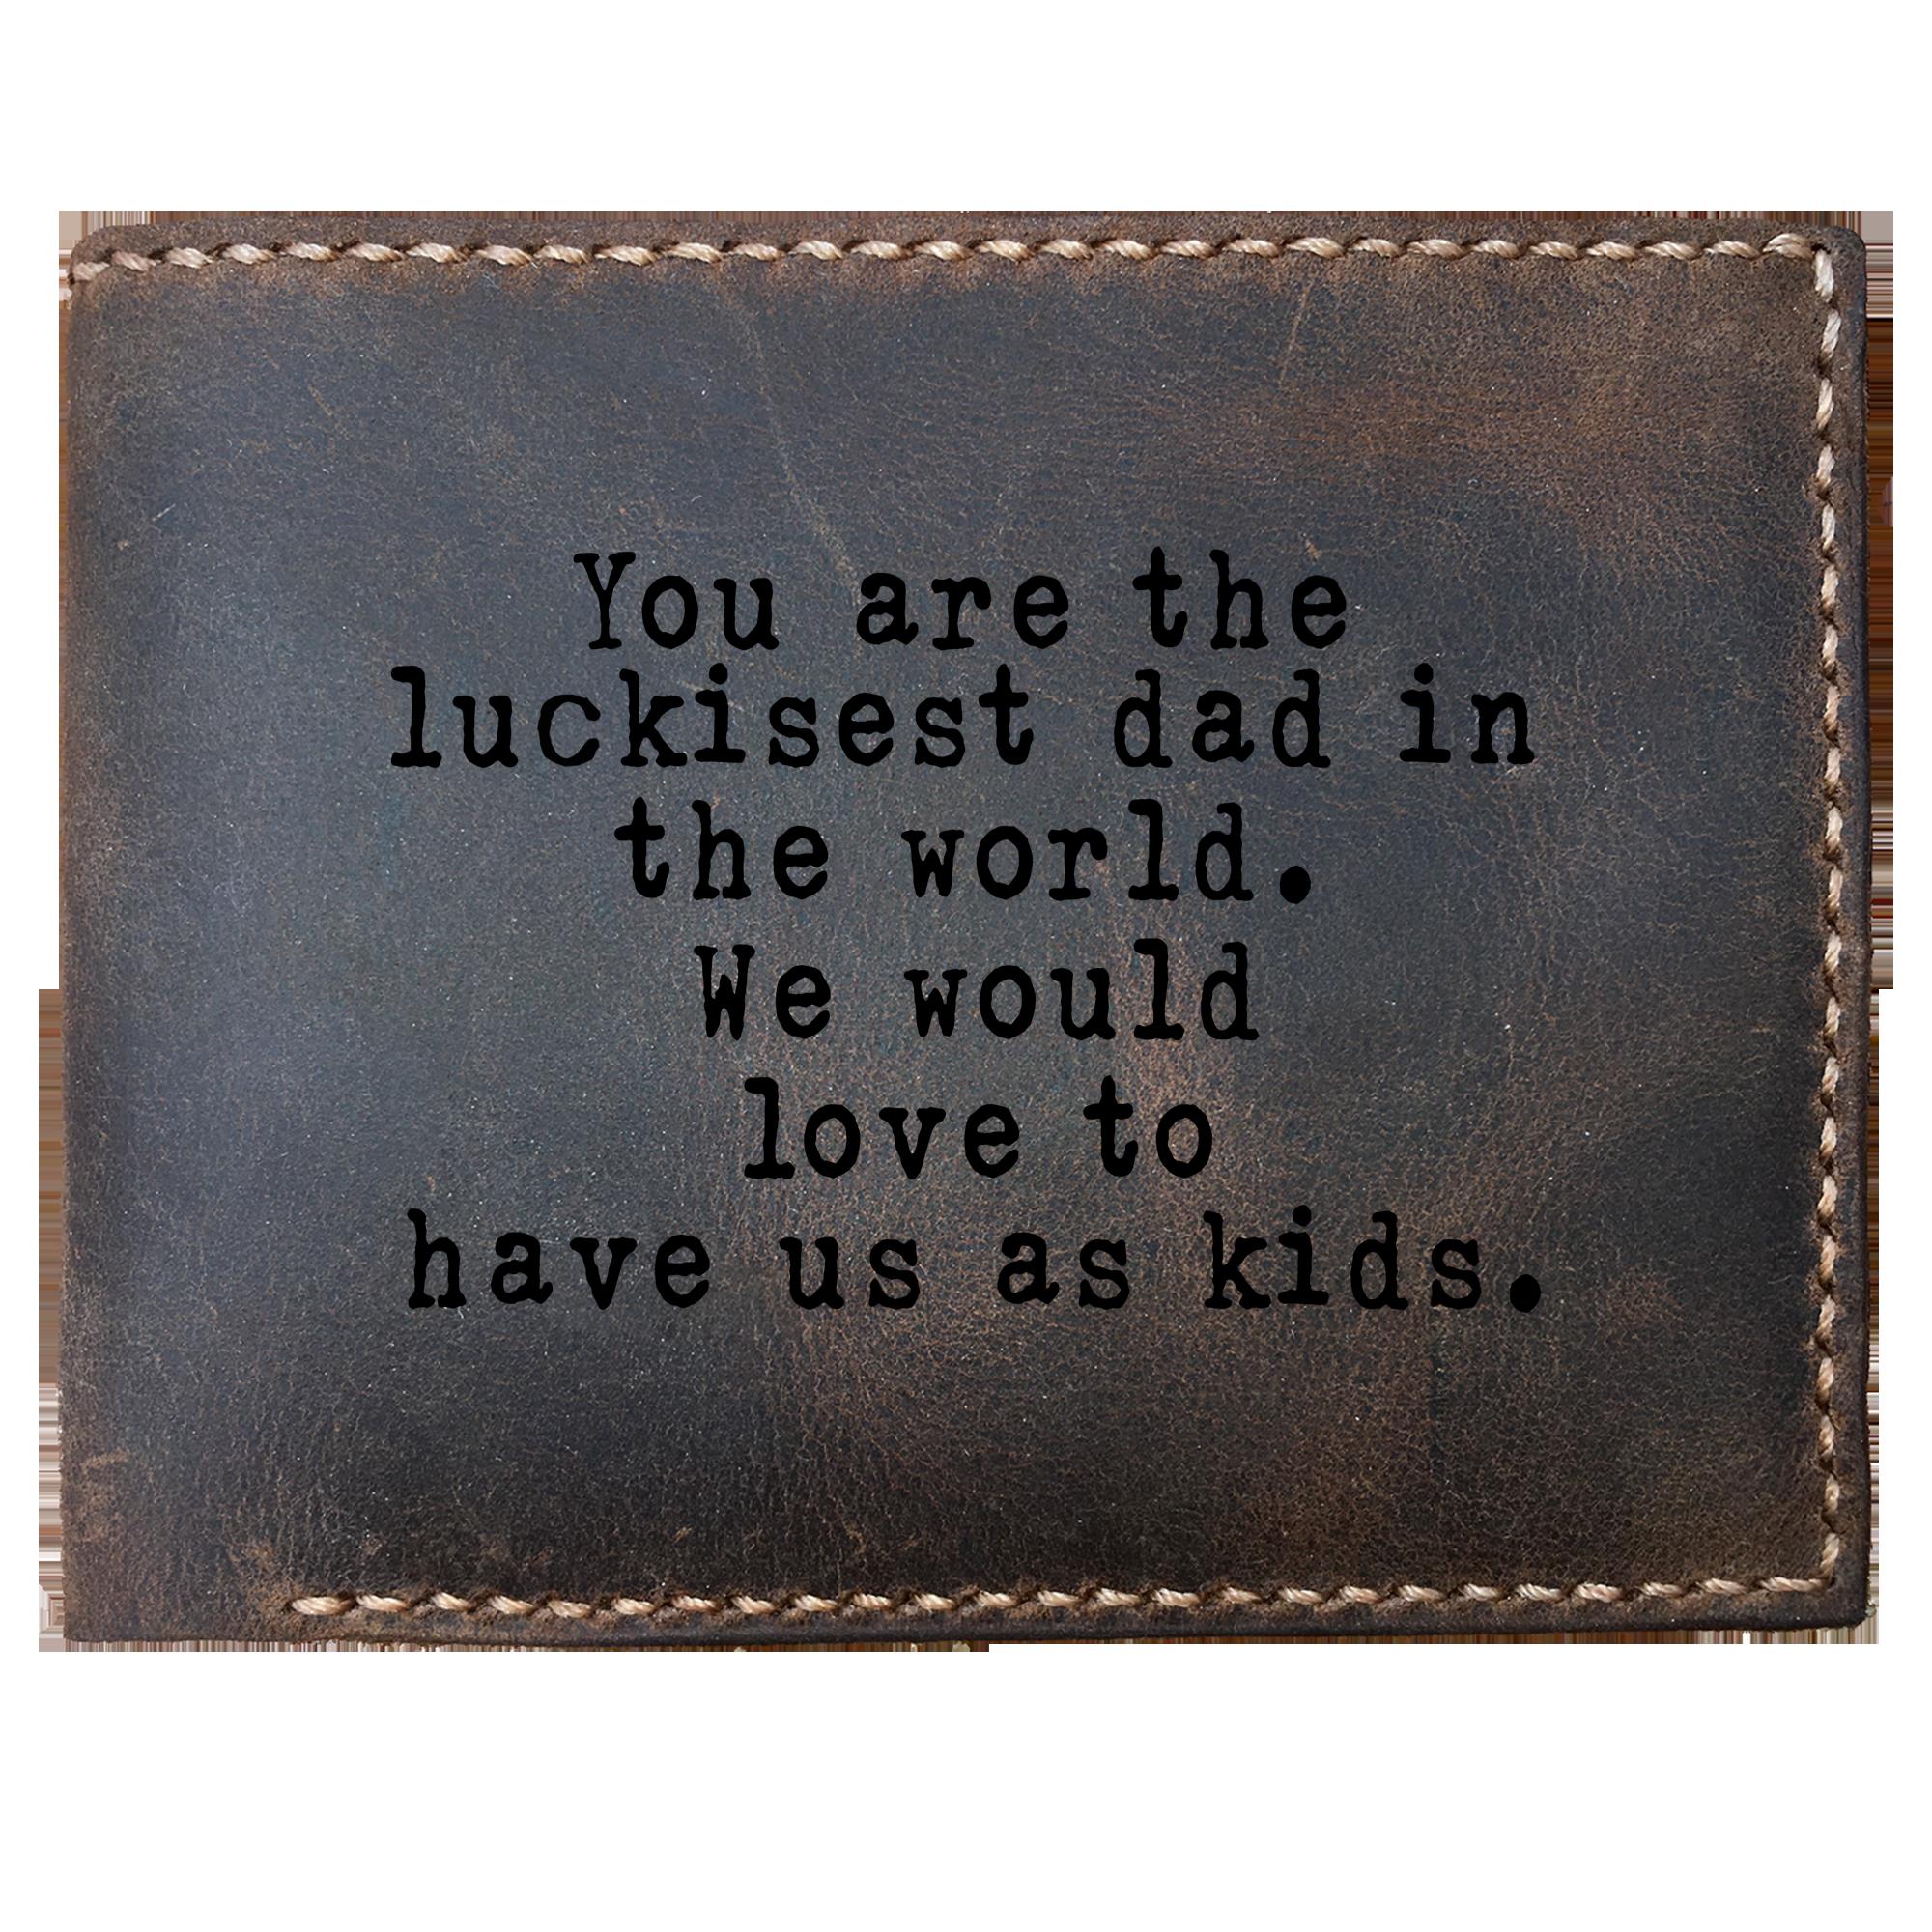 Skitongifts Funny Custom Laser Engraved Bifold Leather Wallet, From Kids - You're The Luckiest Dad In The World - We Would Love To Have Us As Kids